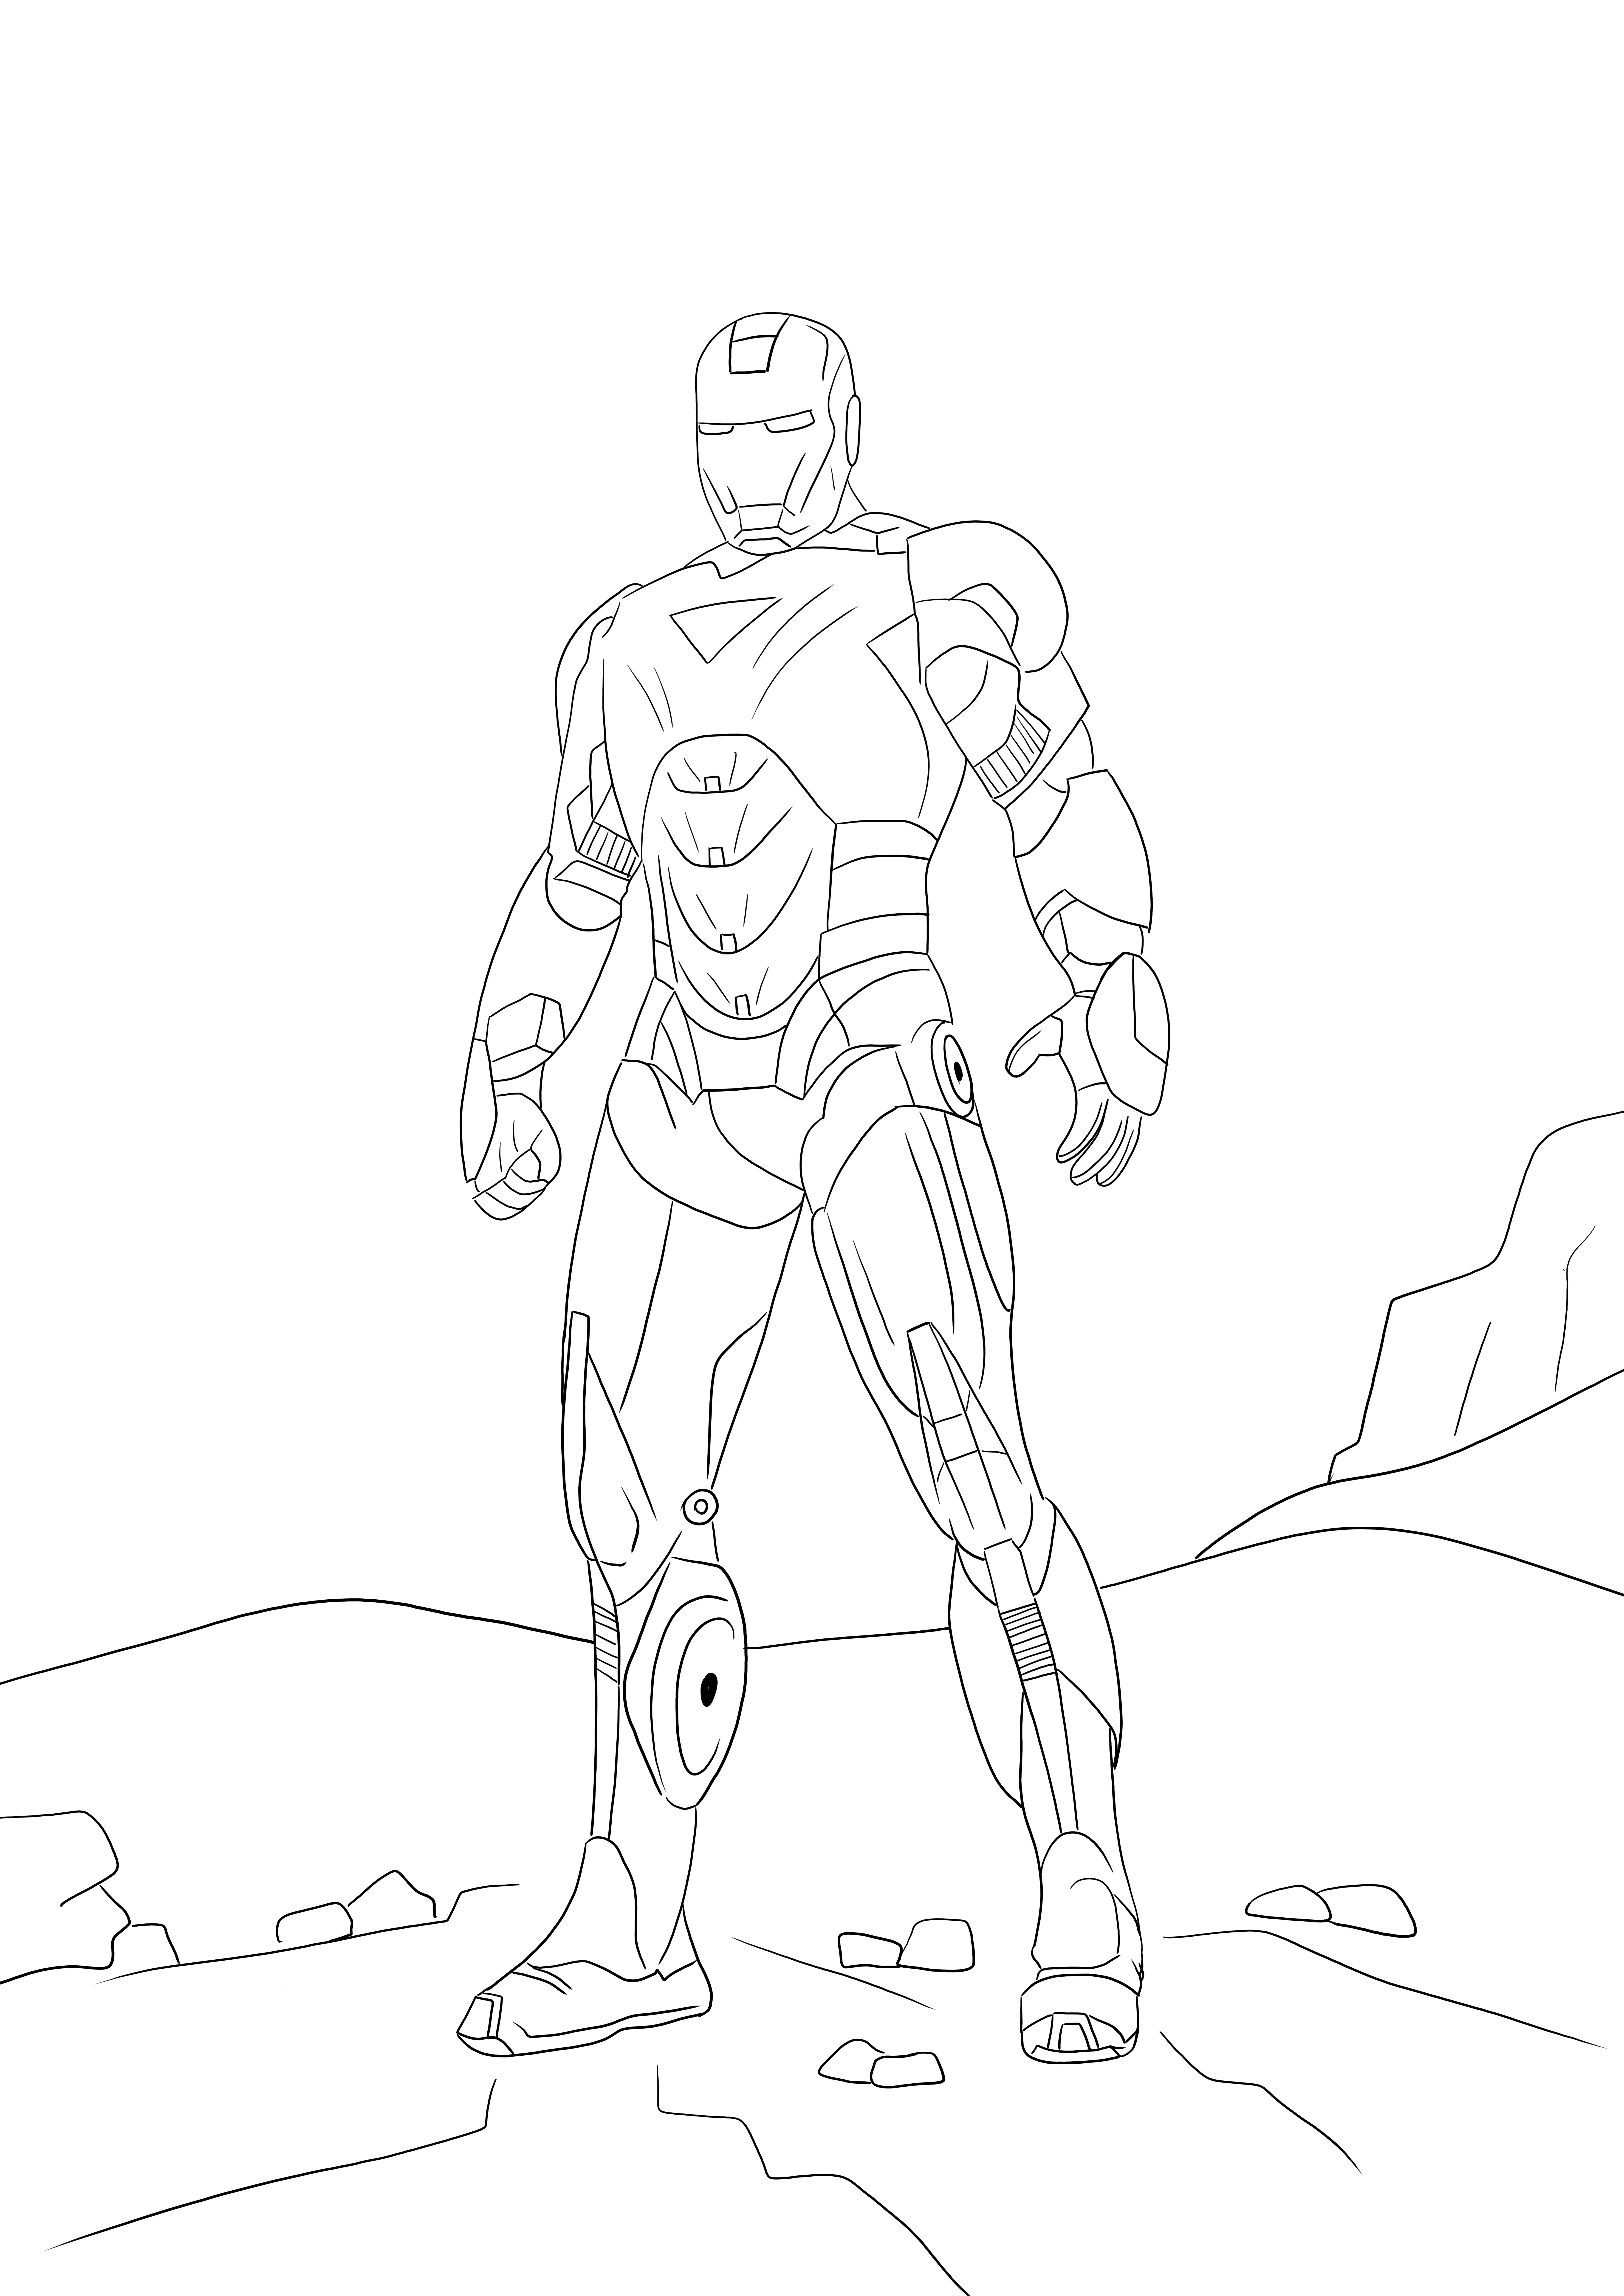 Iron man ready to fight coloring and free downloading sheet